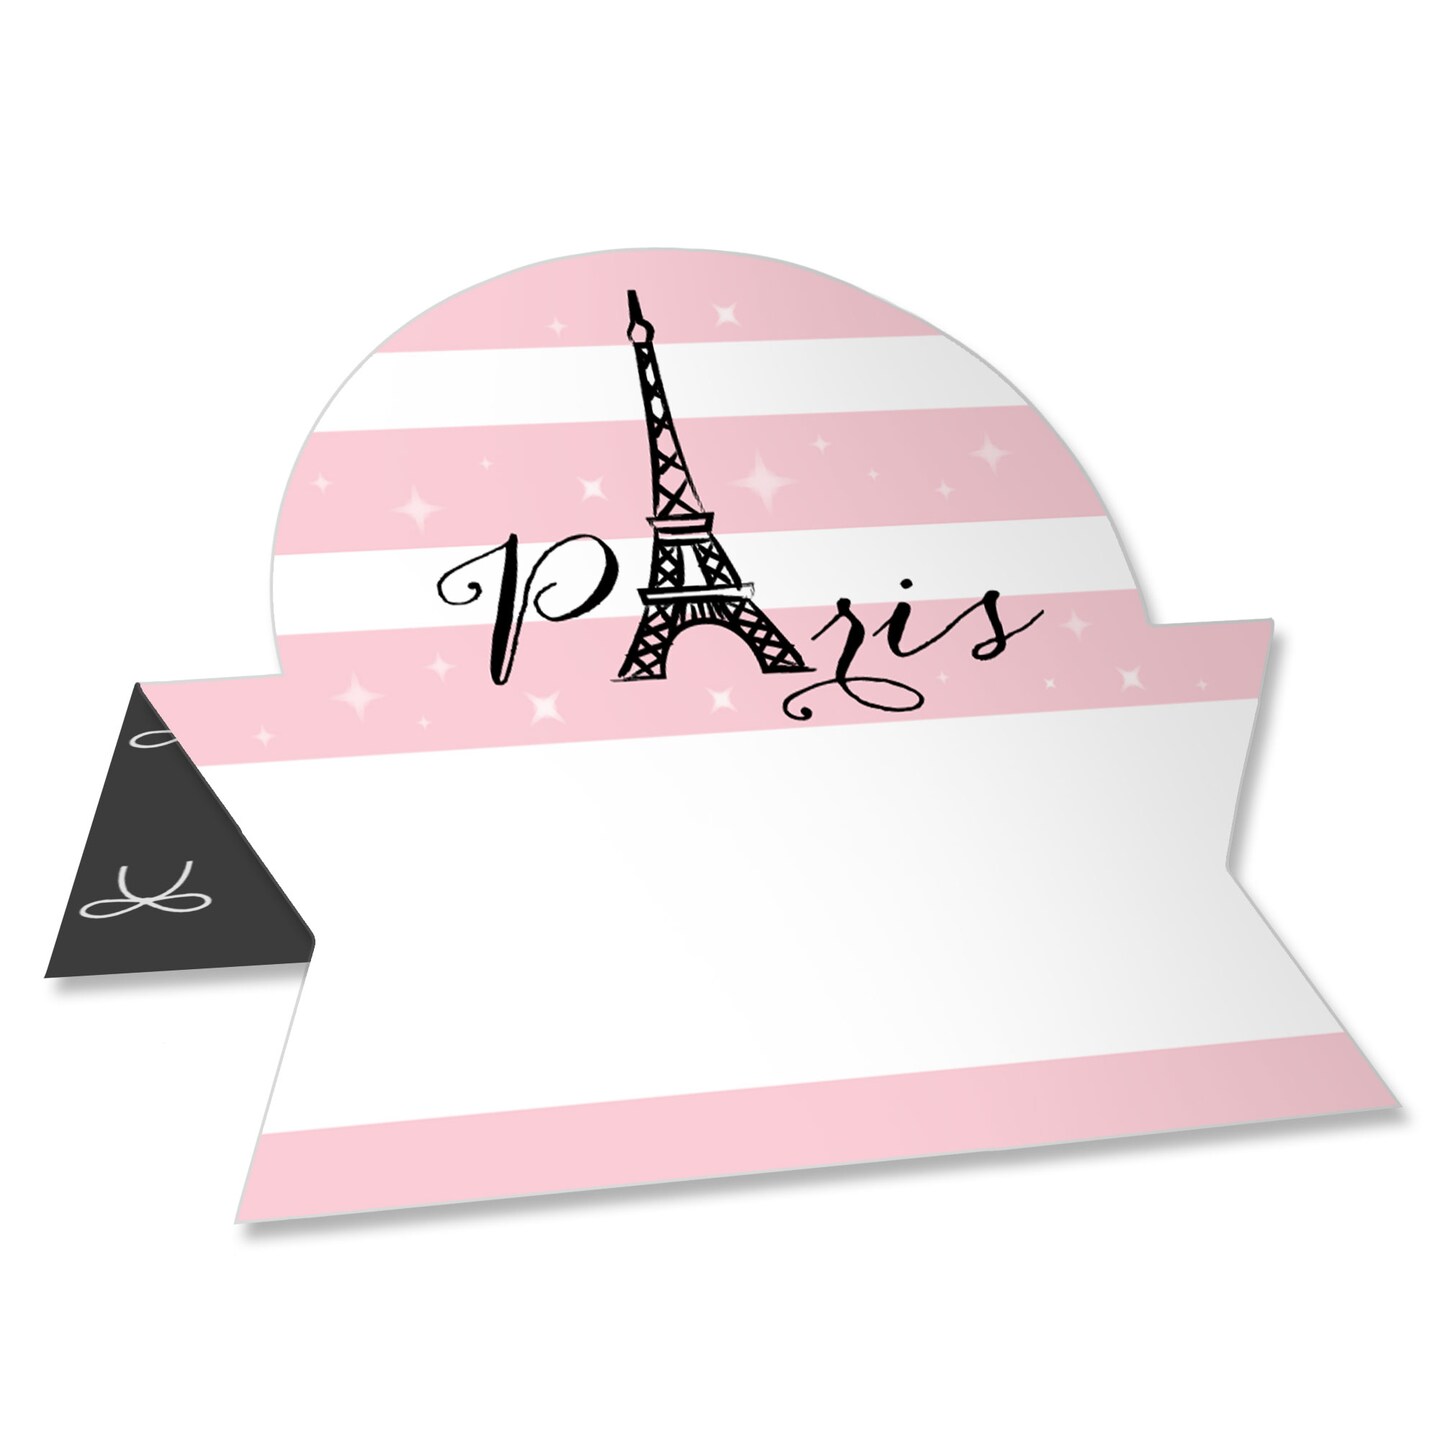 Big Dot of Happiness Paris, Ooh La La - Paris Themed Baby Shower or Birthday Party Tent Buffet Card - Table Setting Name Place Cards - Set of 24